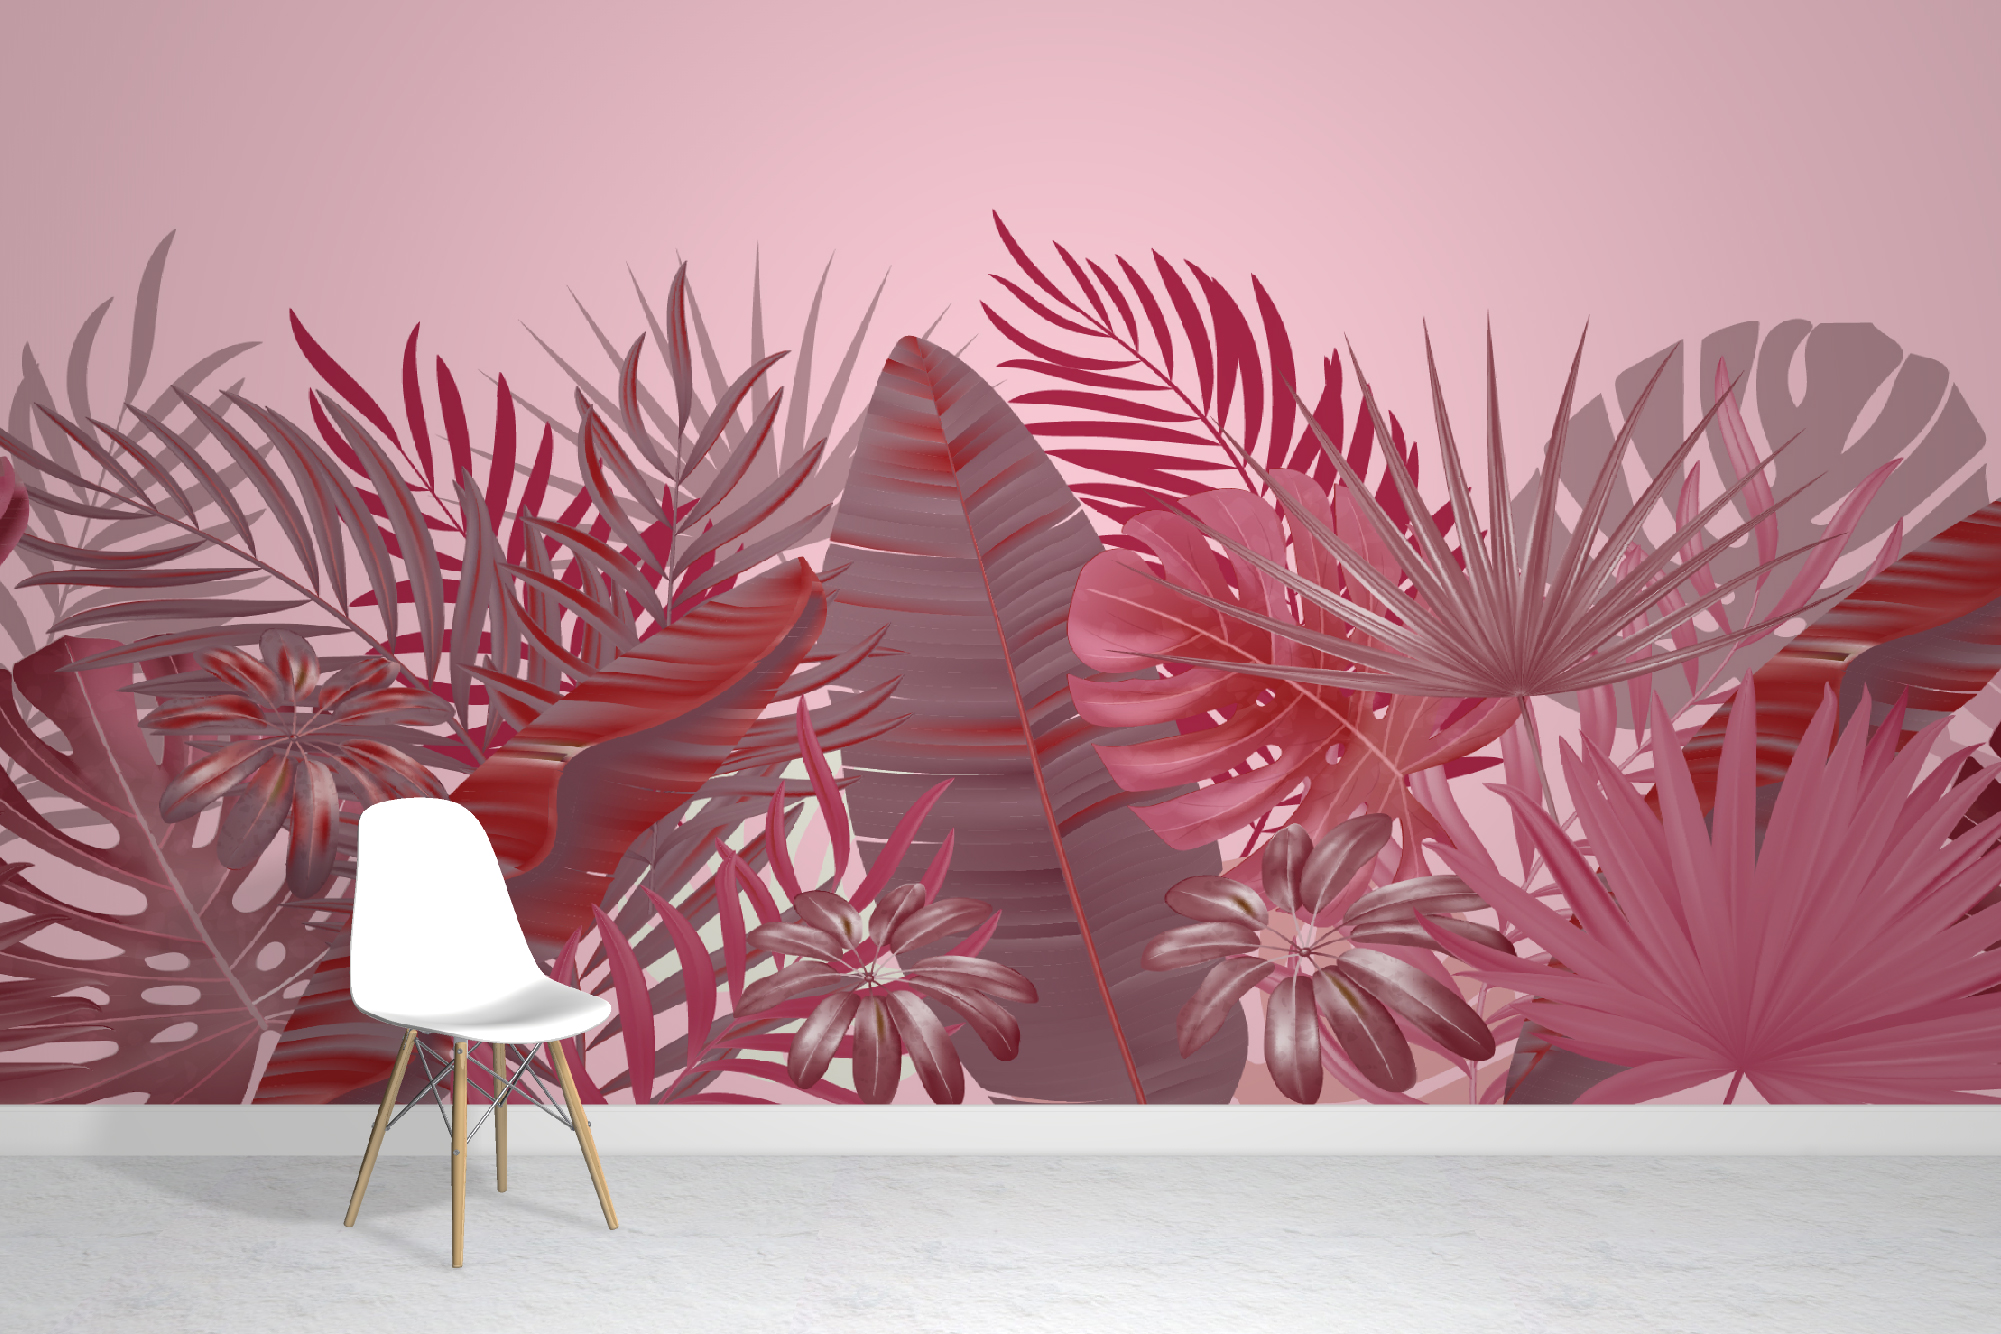 We love this Red Tropical Wallpaper Mural with its bold pink background that sets the scene for red tropical leaves in multiple shades,